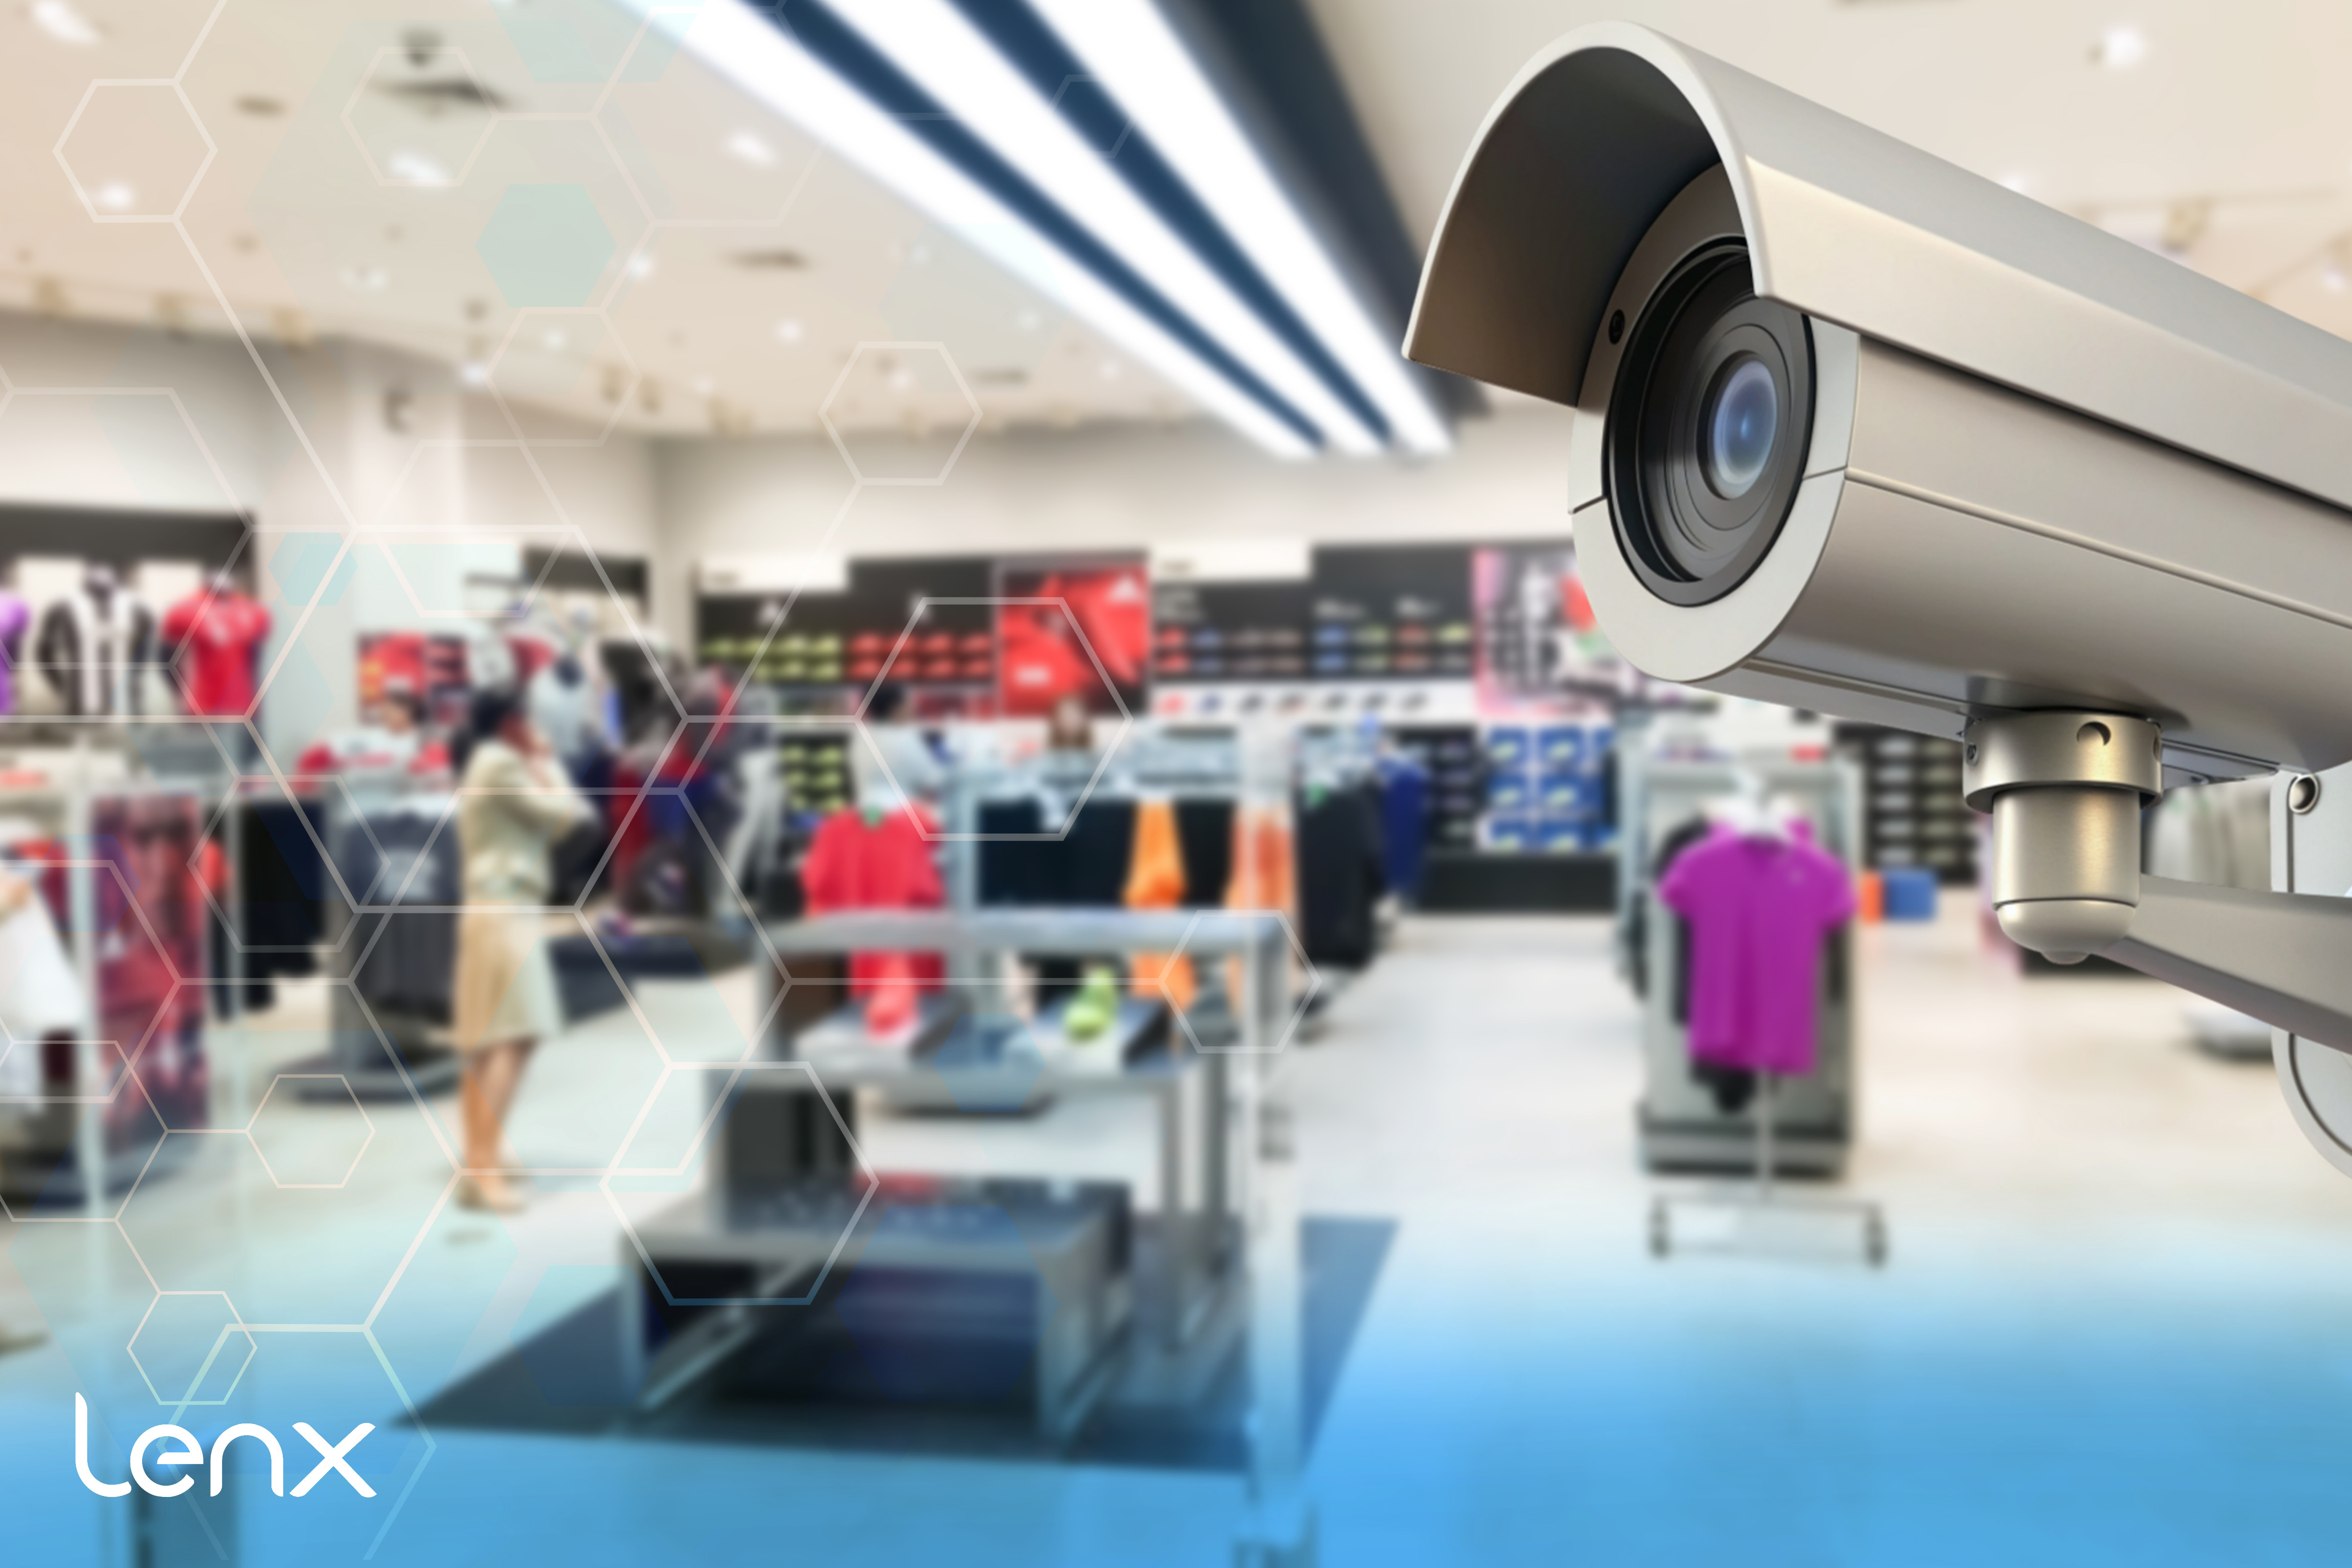 How Large Retailers And Grocery Stores Can Prevent Tragedy With AI Security, Gun Detection Systems